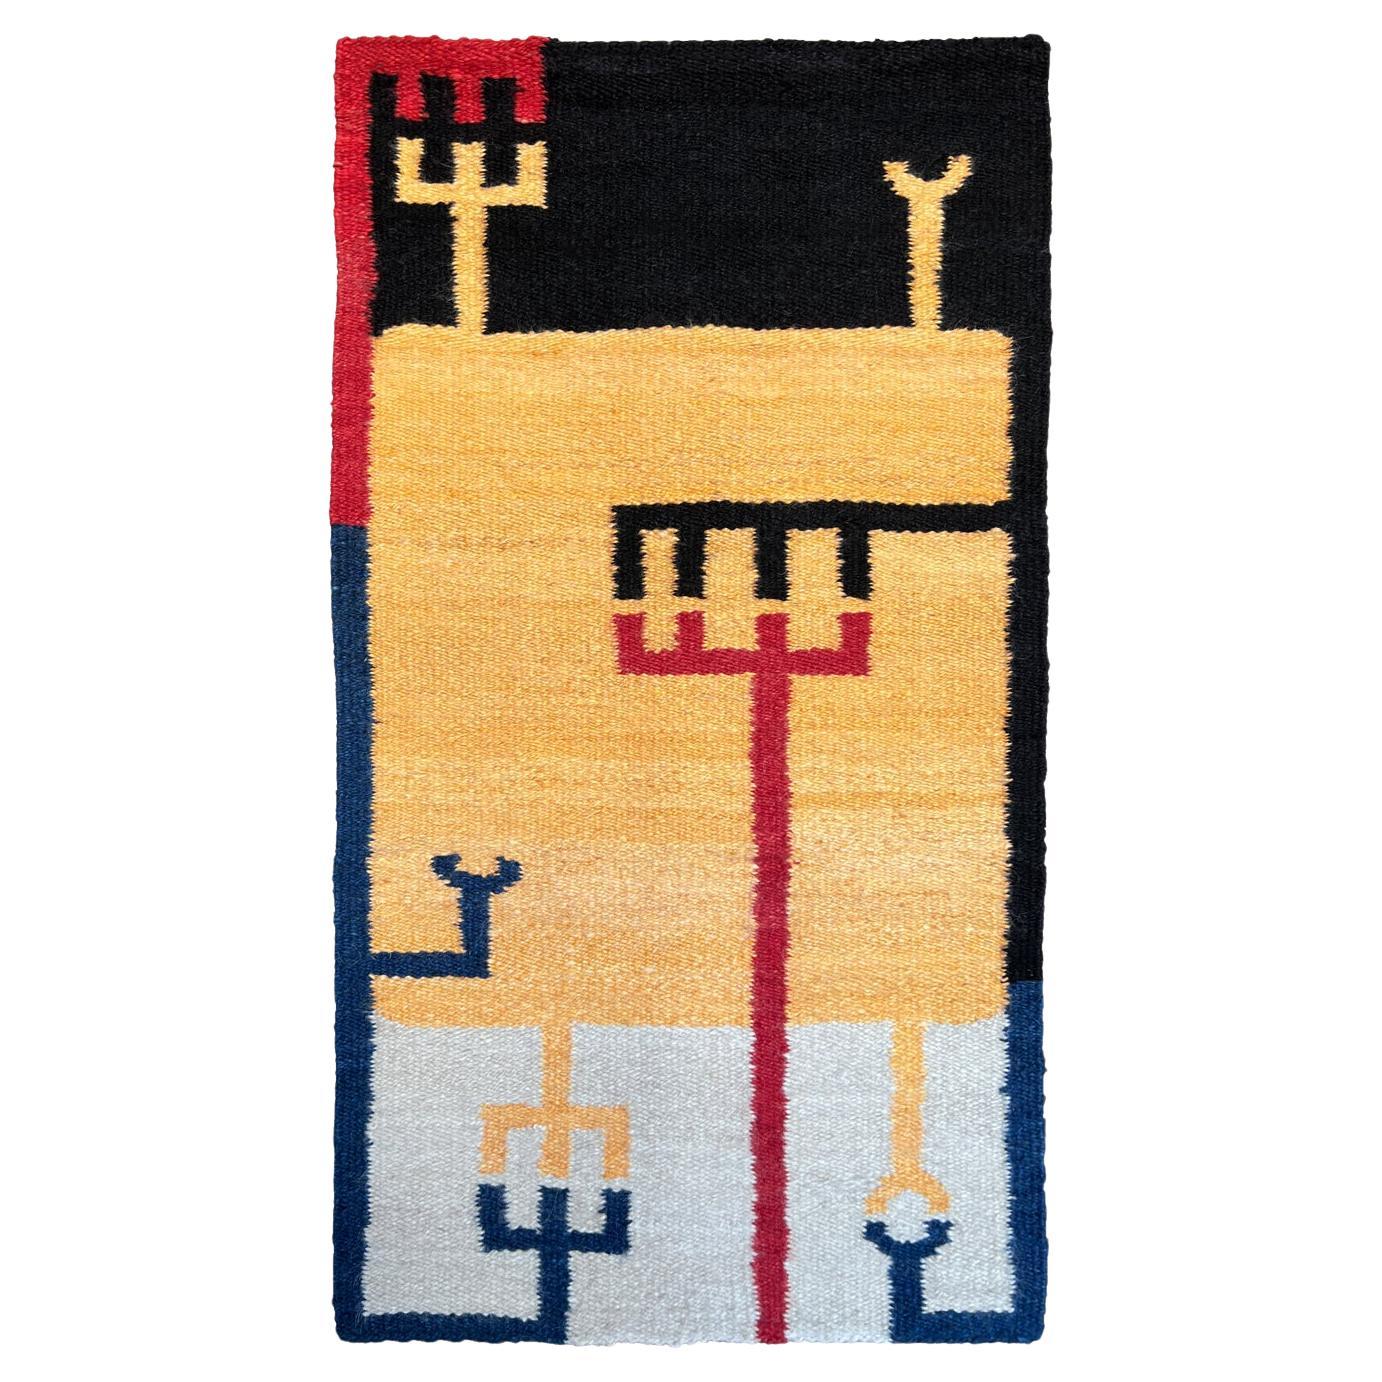 Hand-woven wool rug "Yellow Circuit" by Victor Grippo For Sale